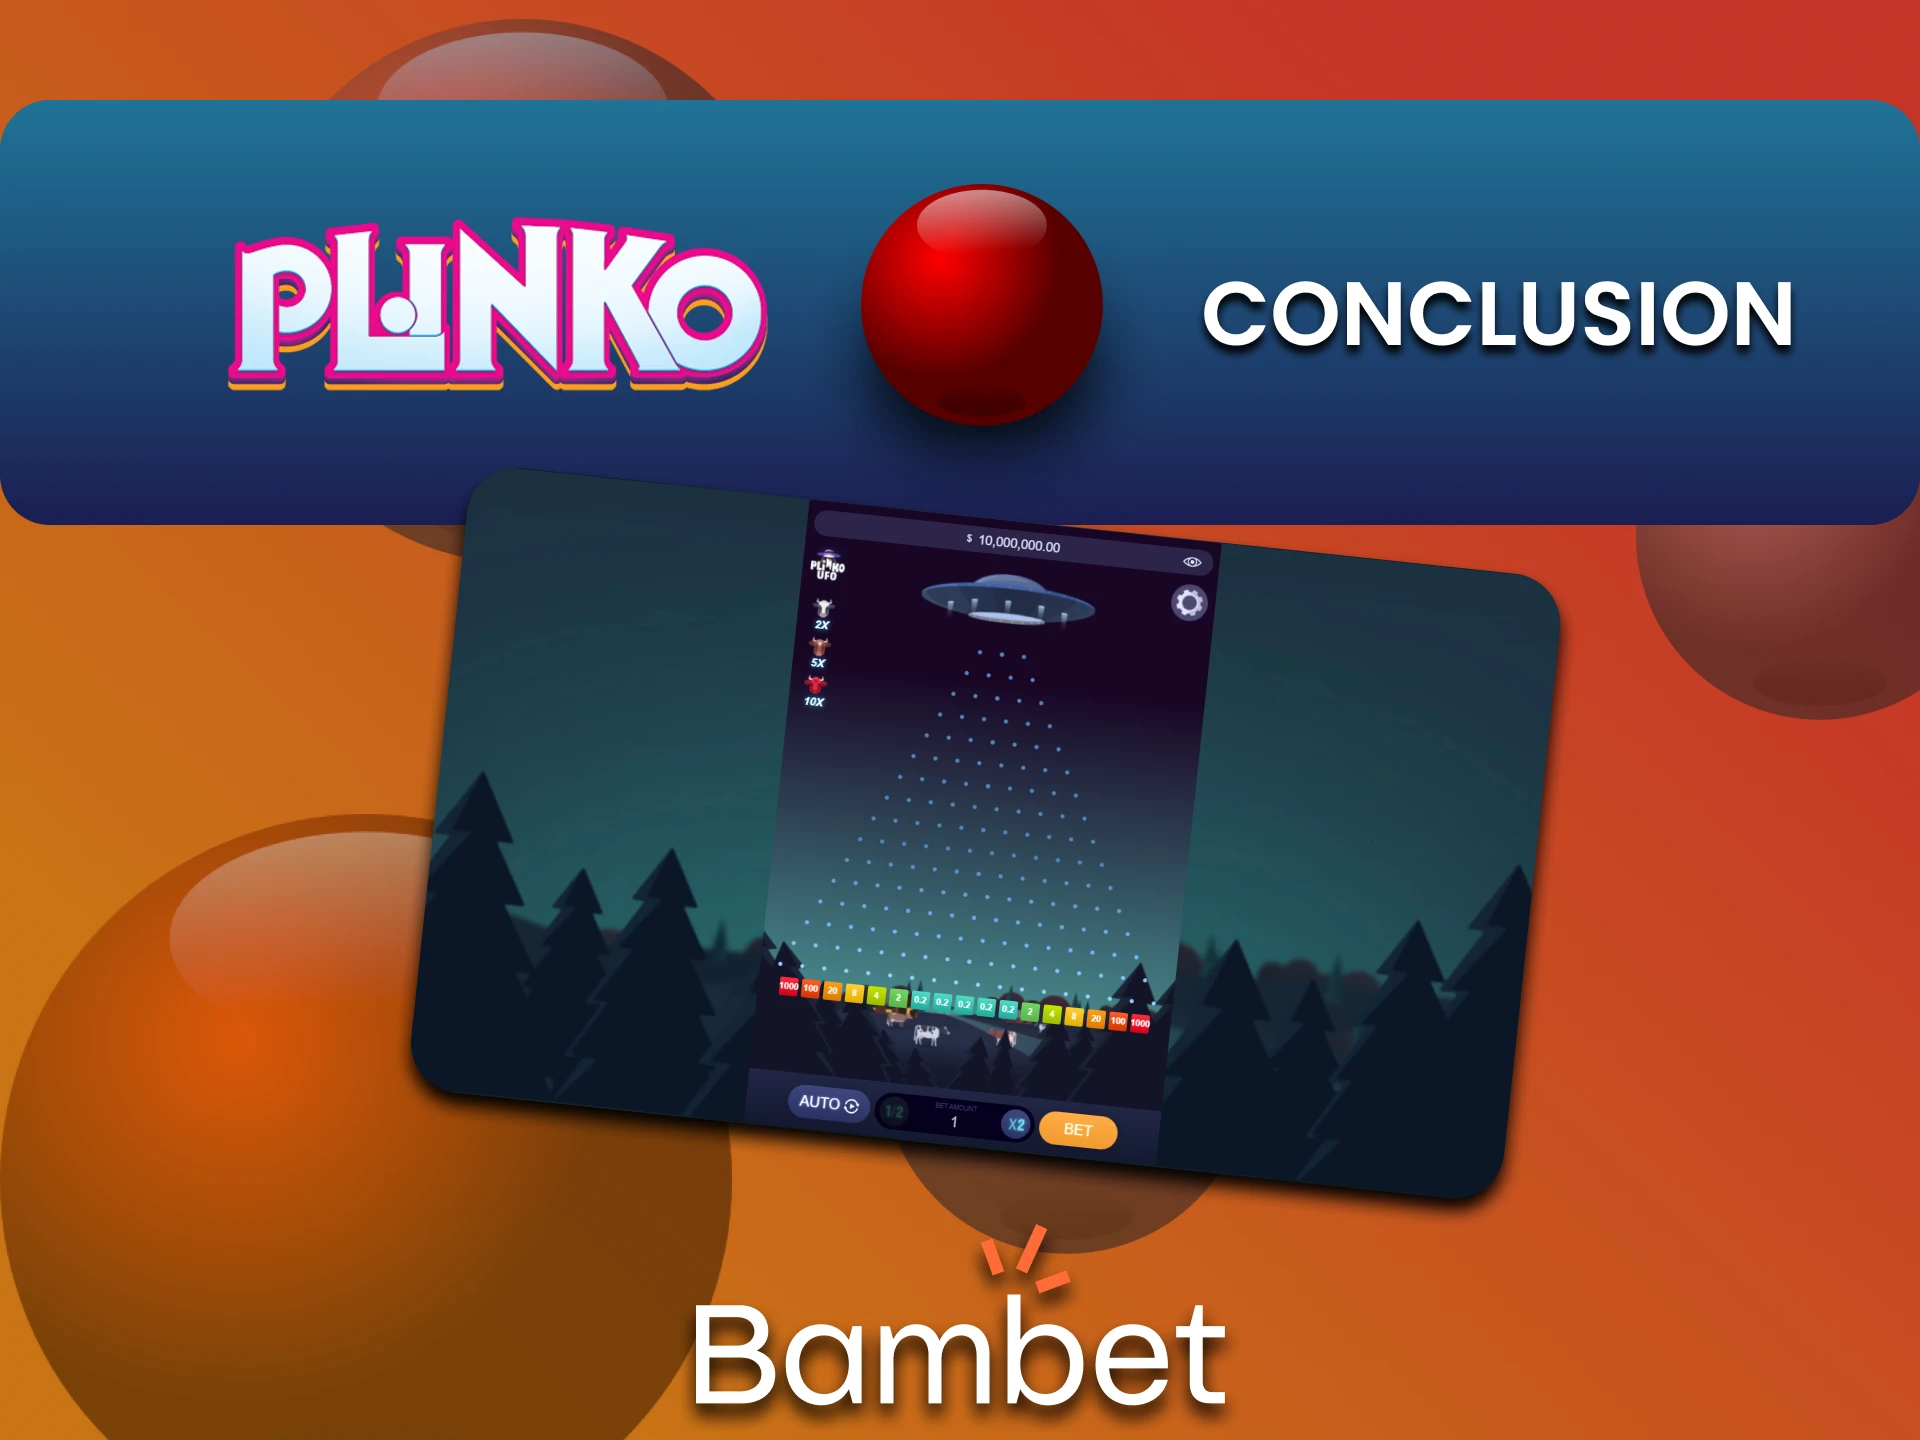 The best choice for playing Plinko is the Bambet service.